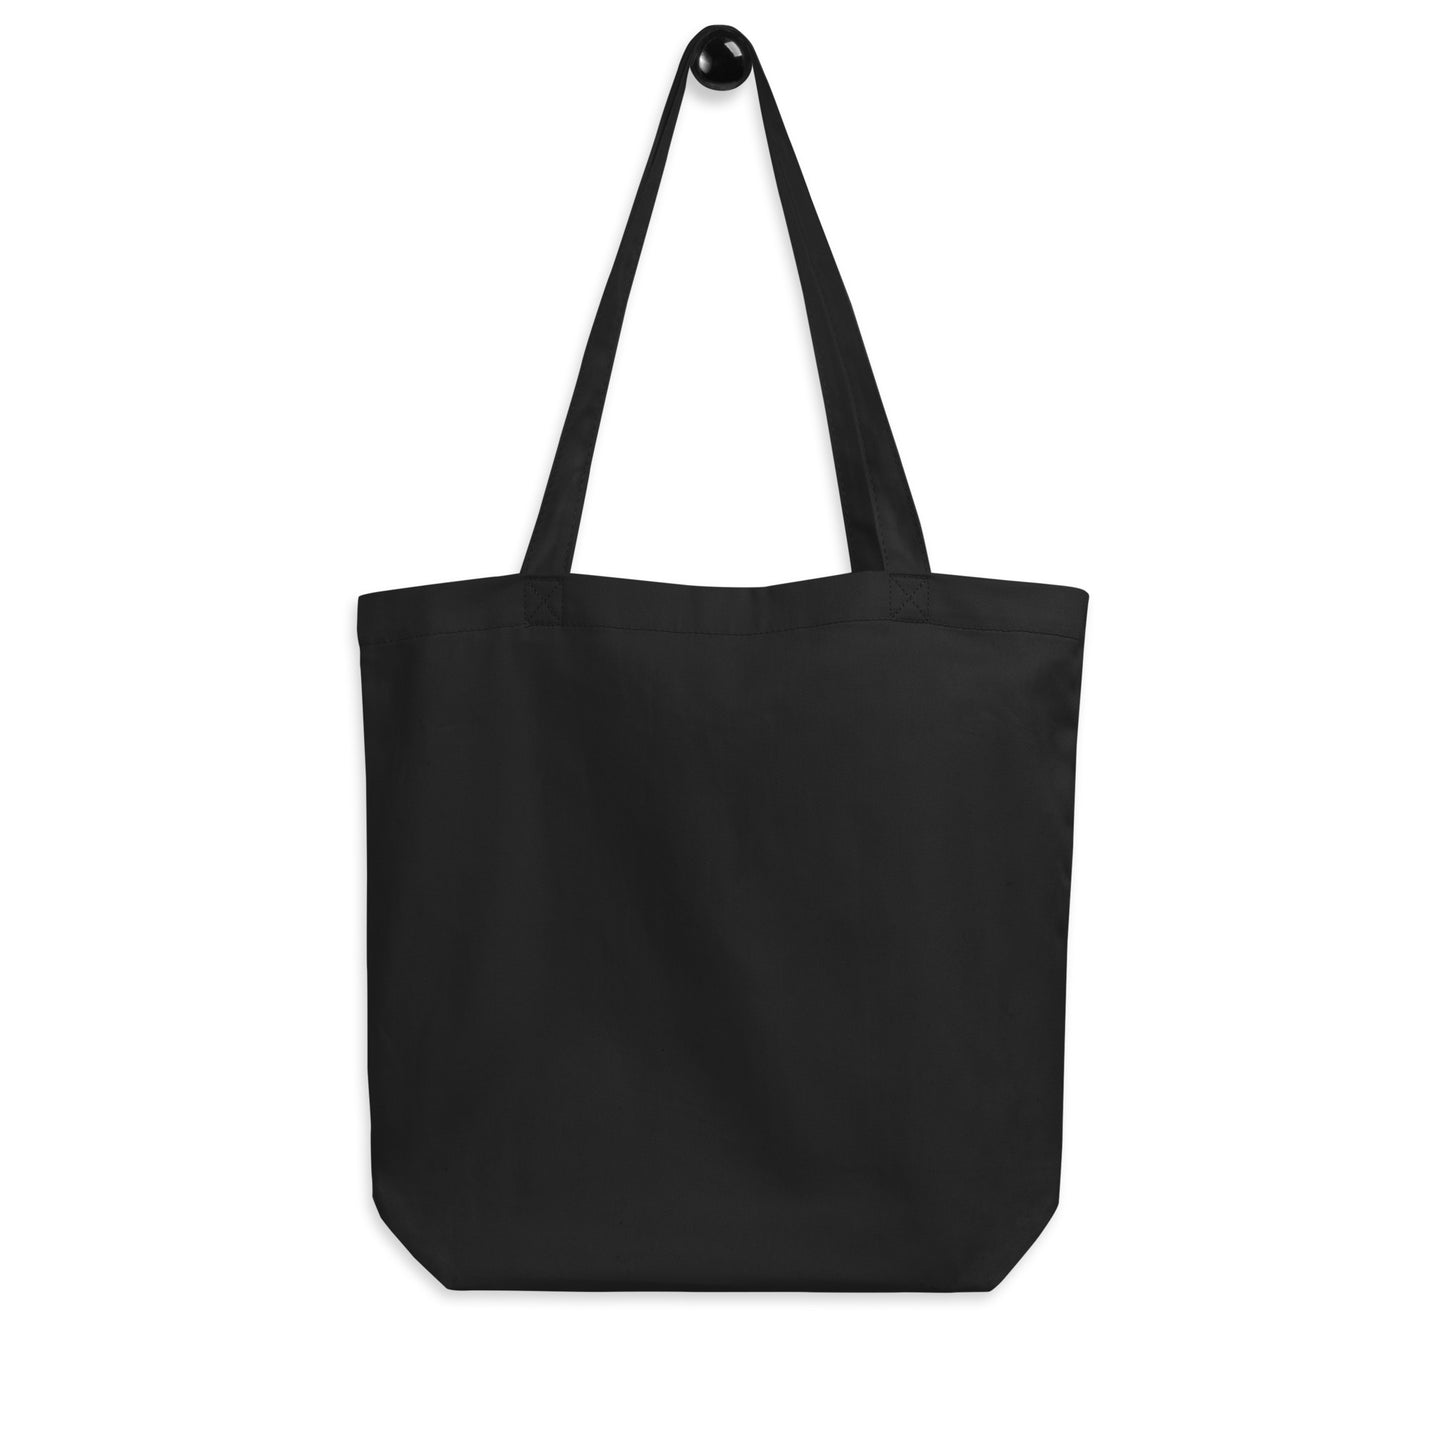 Unique Travel Gift Organic Tote - White Oval • YQB Quebec City • YHM Designs - Image 05